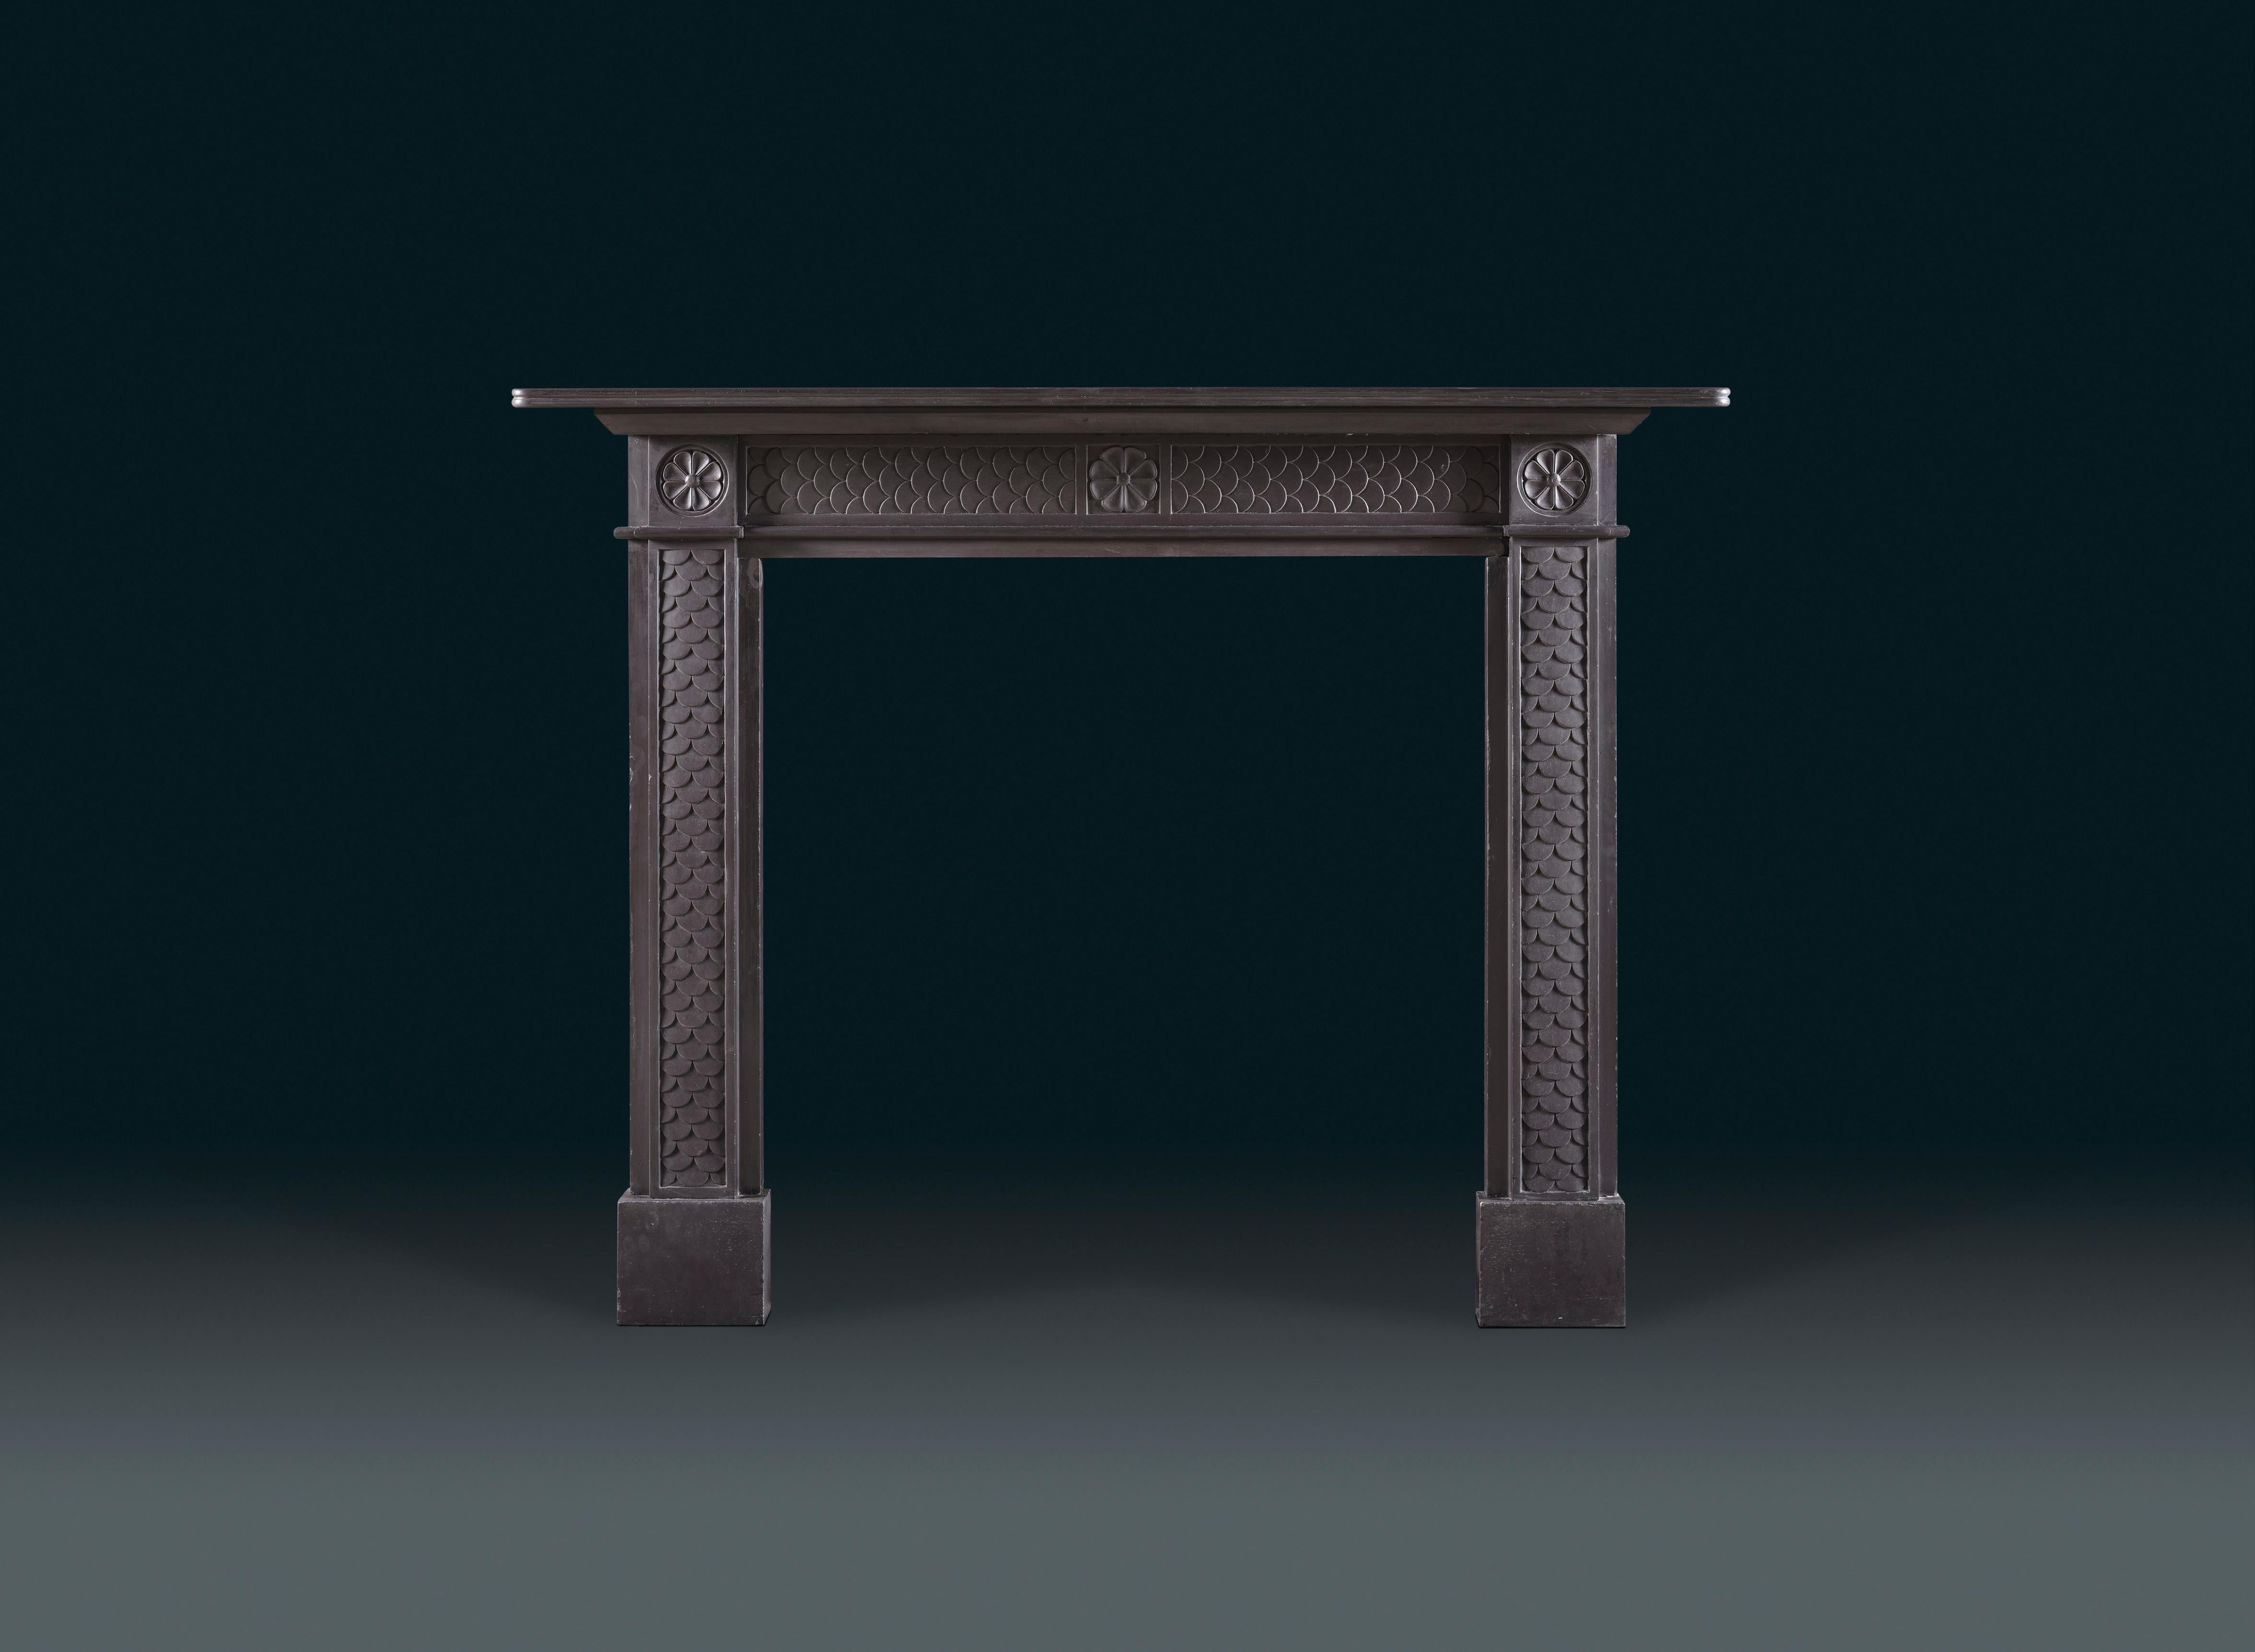 A refined early Regency Welsh chimneypiece carved in slate.
A fish-scale detail runs through the surround, and a patera motif is shown in the corner blocks and at centre of the header. The thin shelf together with the proportions of this design are